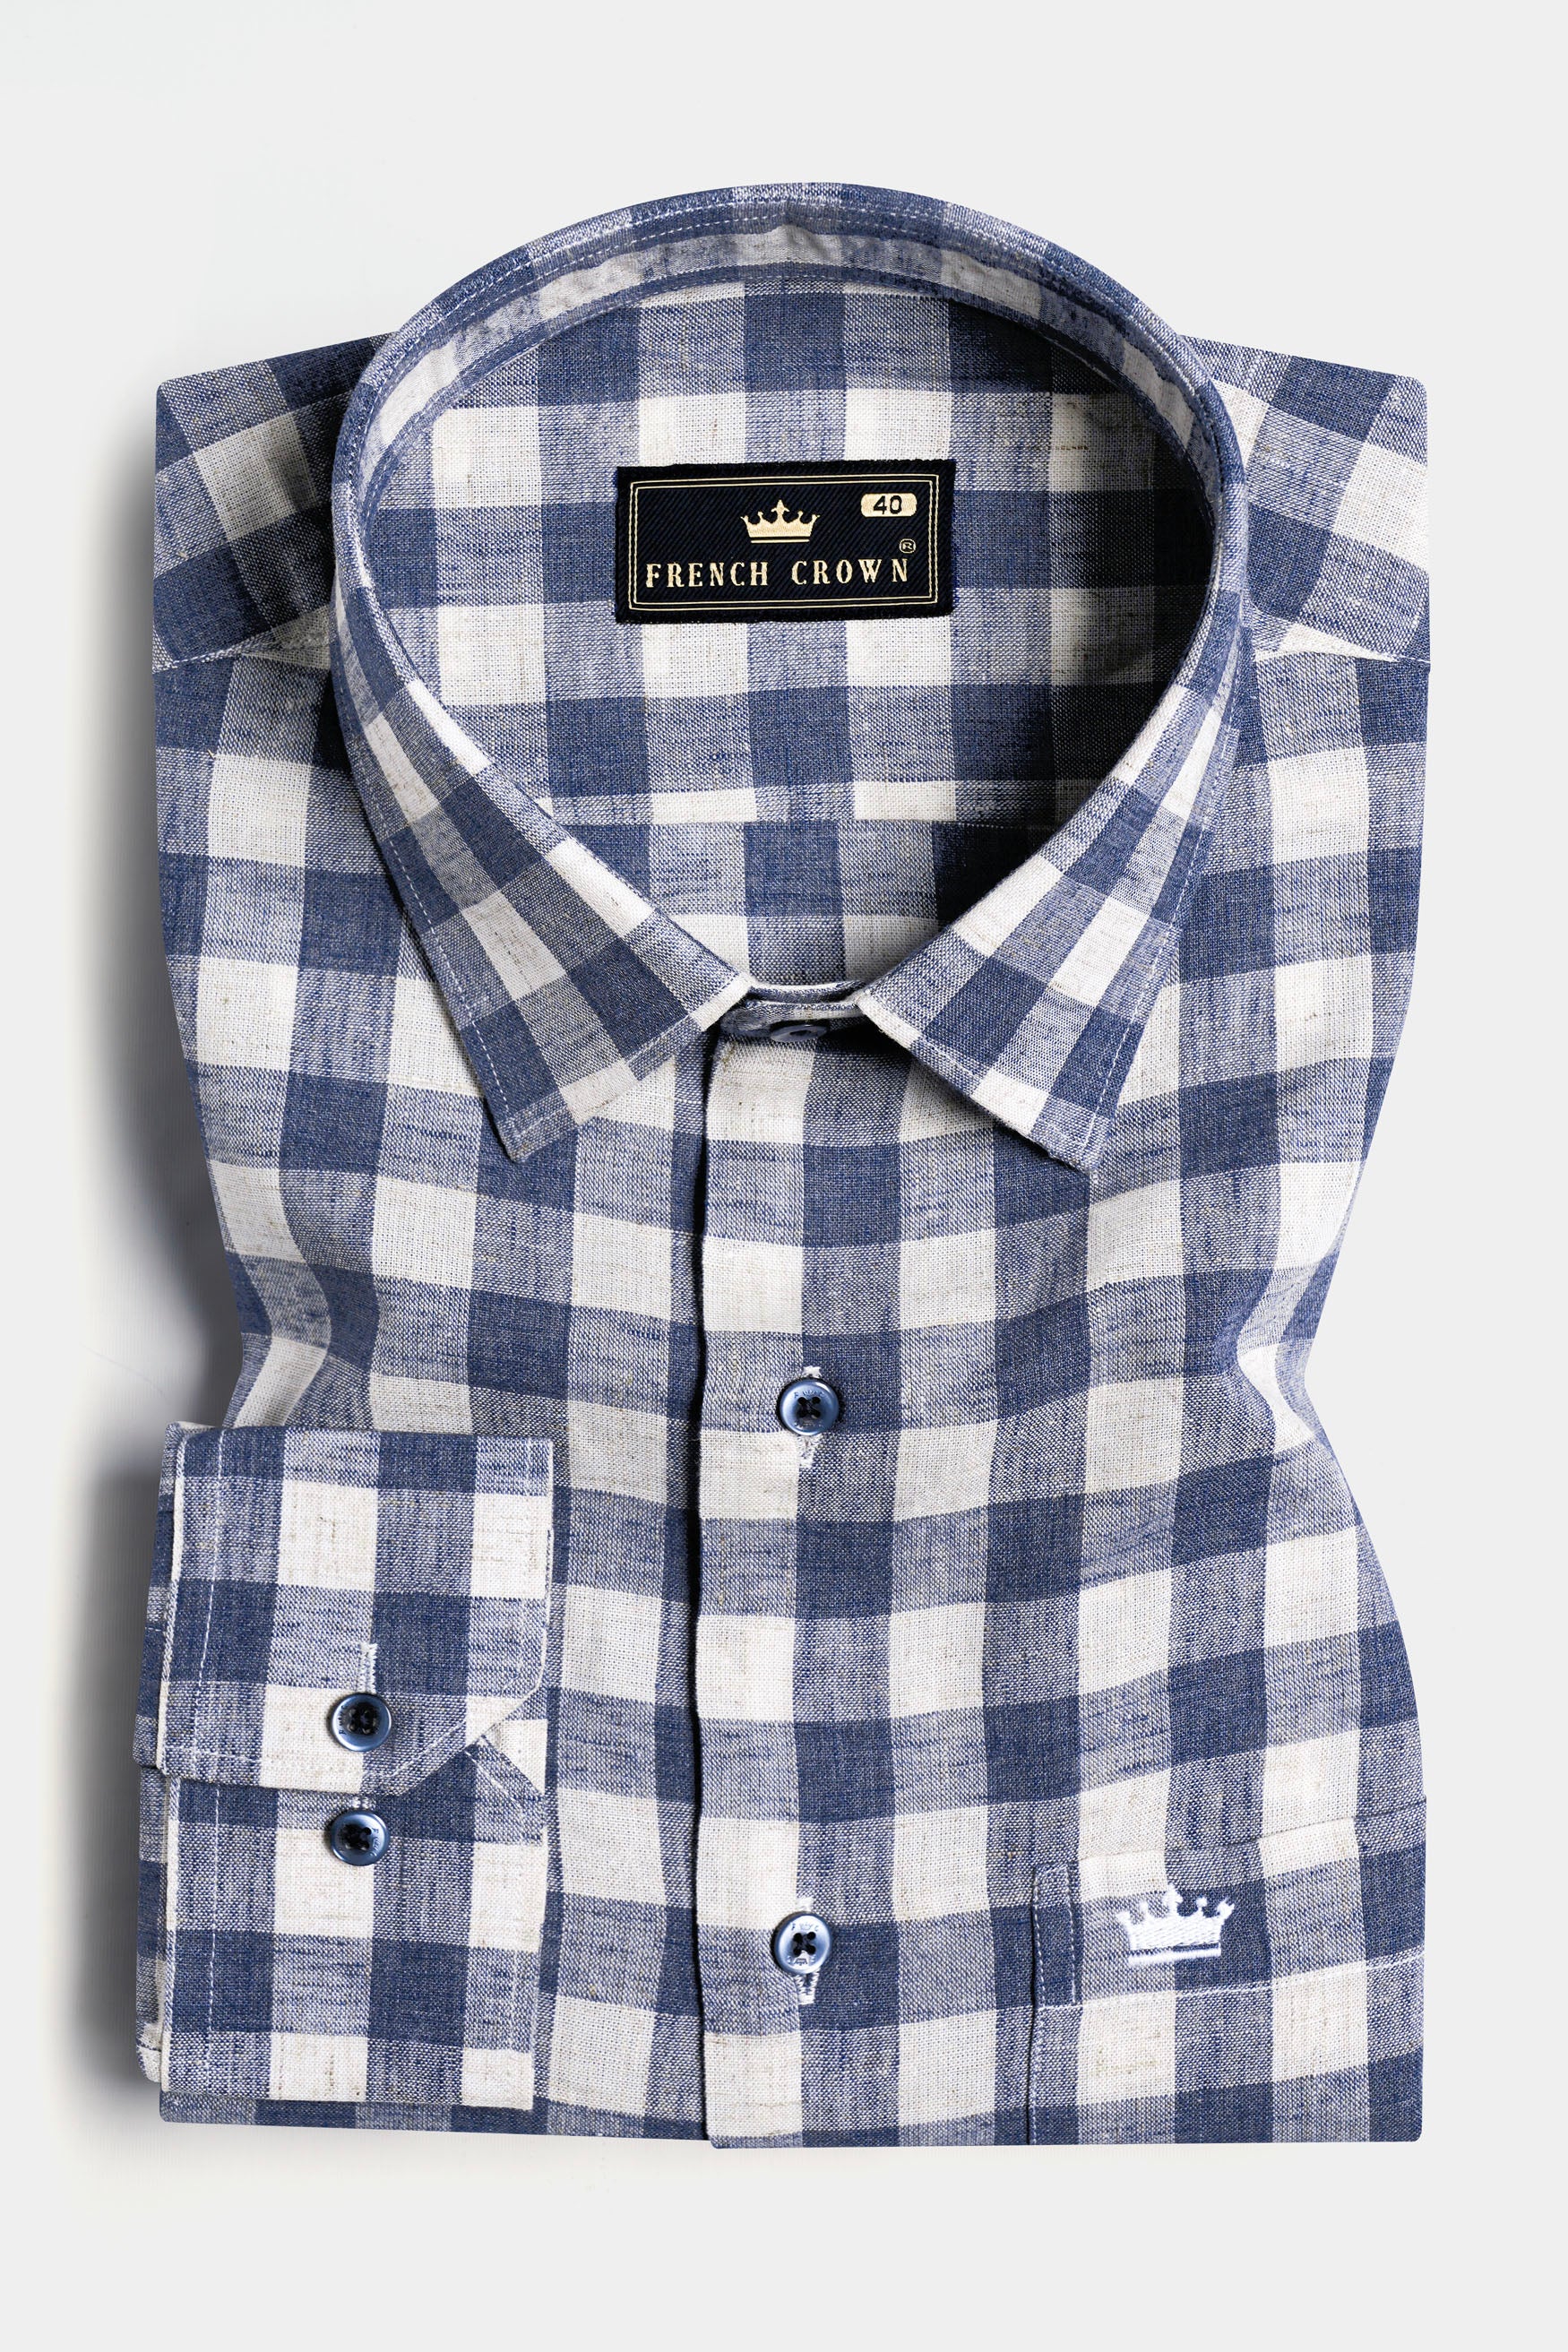 Bright White and Cadet Blue Plaid Luxurious Linen Shirt 11682-BLE-38, 11682-BLE-H-38, 11682-BLE-39, 11682-BLE-H-39, 11682-BLE-40, 11682-BLE-H-40, 11682-BLE-42, 11682-BLE-H-42, 11682-BLE-44, 11682-BLE-H-44, 11682-BLE-46, 11682-BLE-H-46, 11682-BLE-48, 11682-BLE-H-48, 11682-BLE-50, 11682-BLE-H-50, 11682-BLE-52, 11682-BLE-H-52